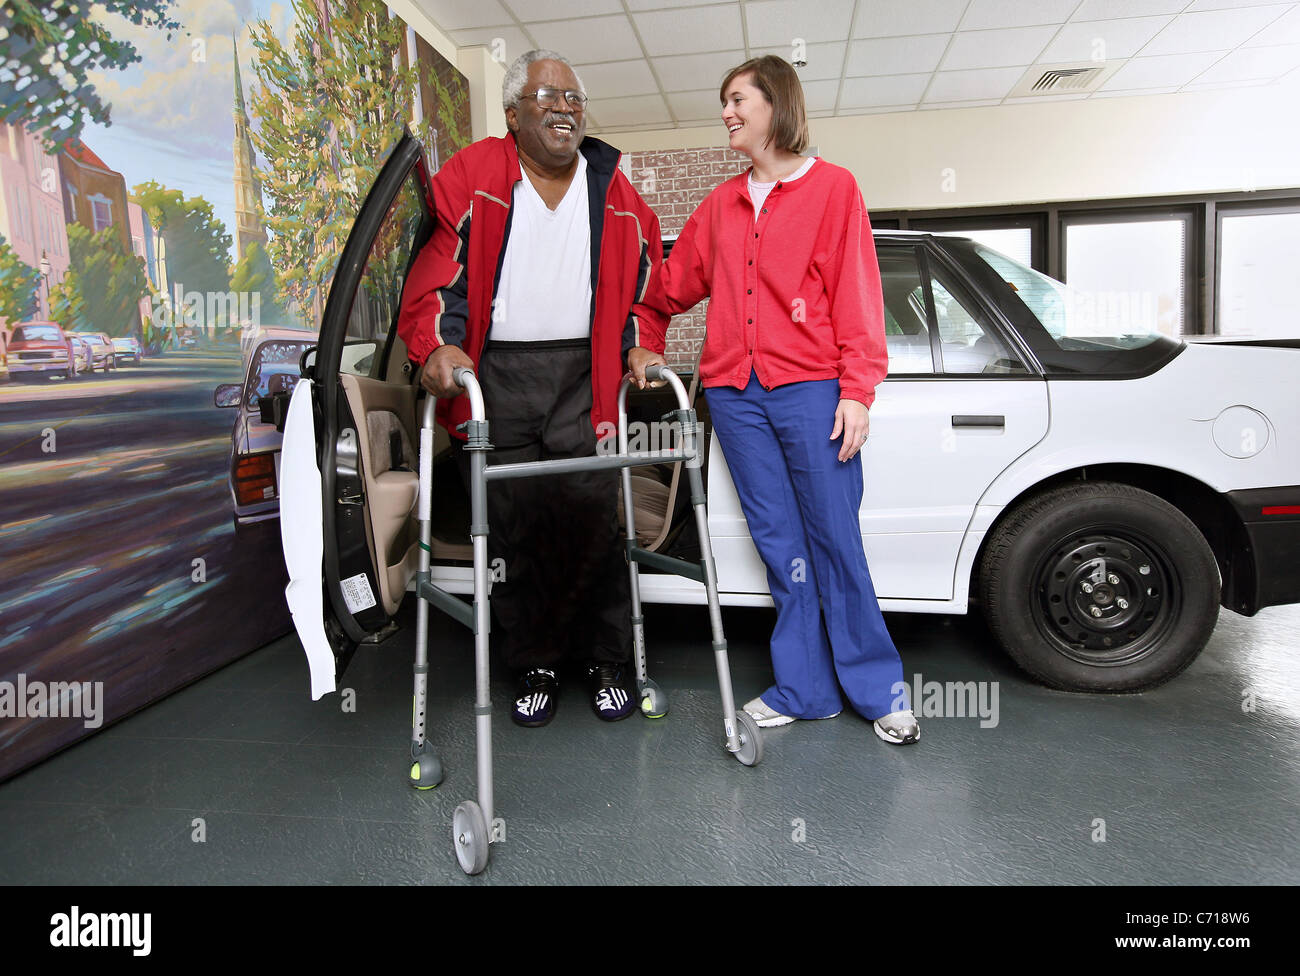 A physical therapist works with a patient on how to get in and out of a car. Stock Photo